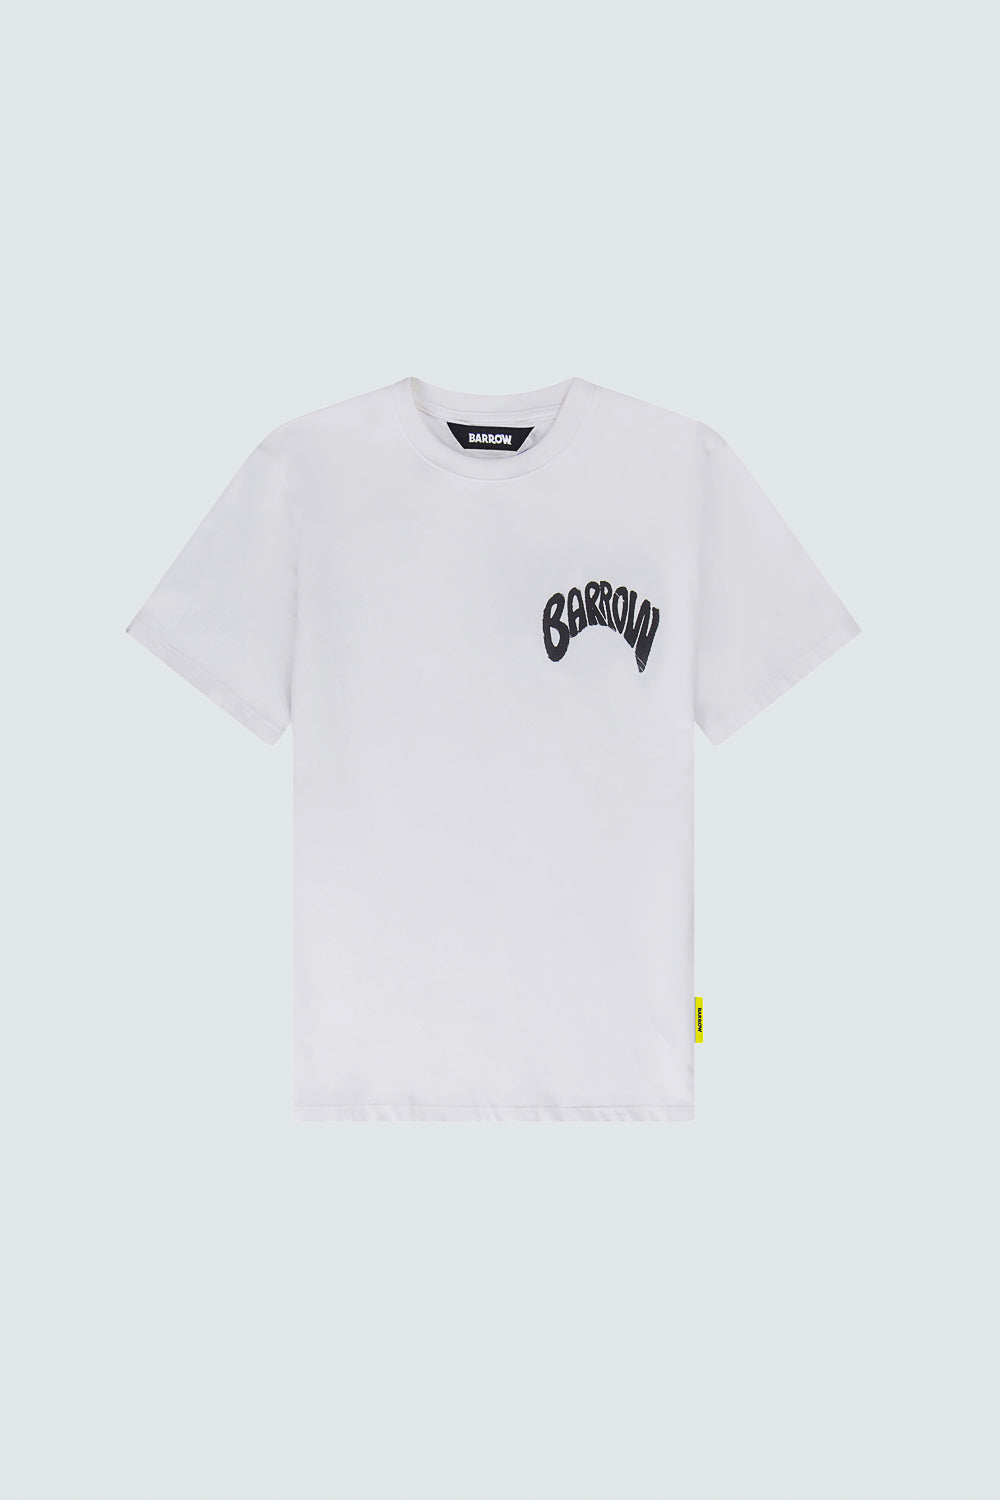 Buy the Barrow Chest Logo T-Shirt in White at Intro. Spend £50 for free UK delivery. Official stockists. We ship worldwide.